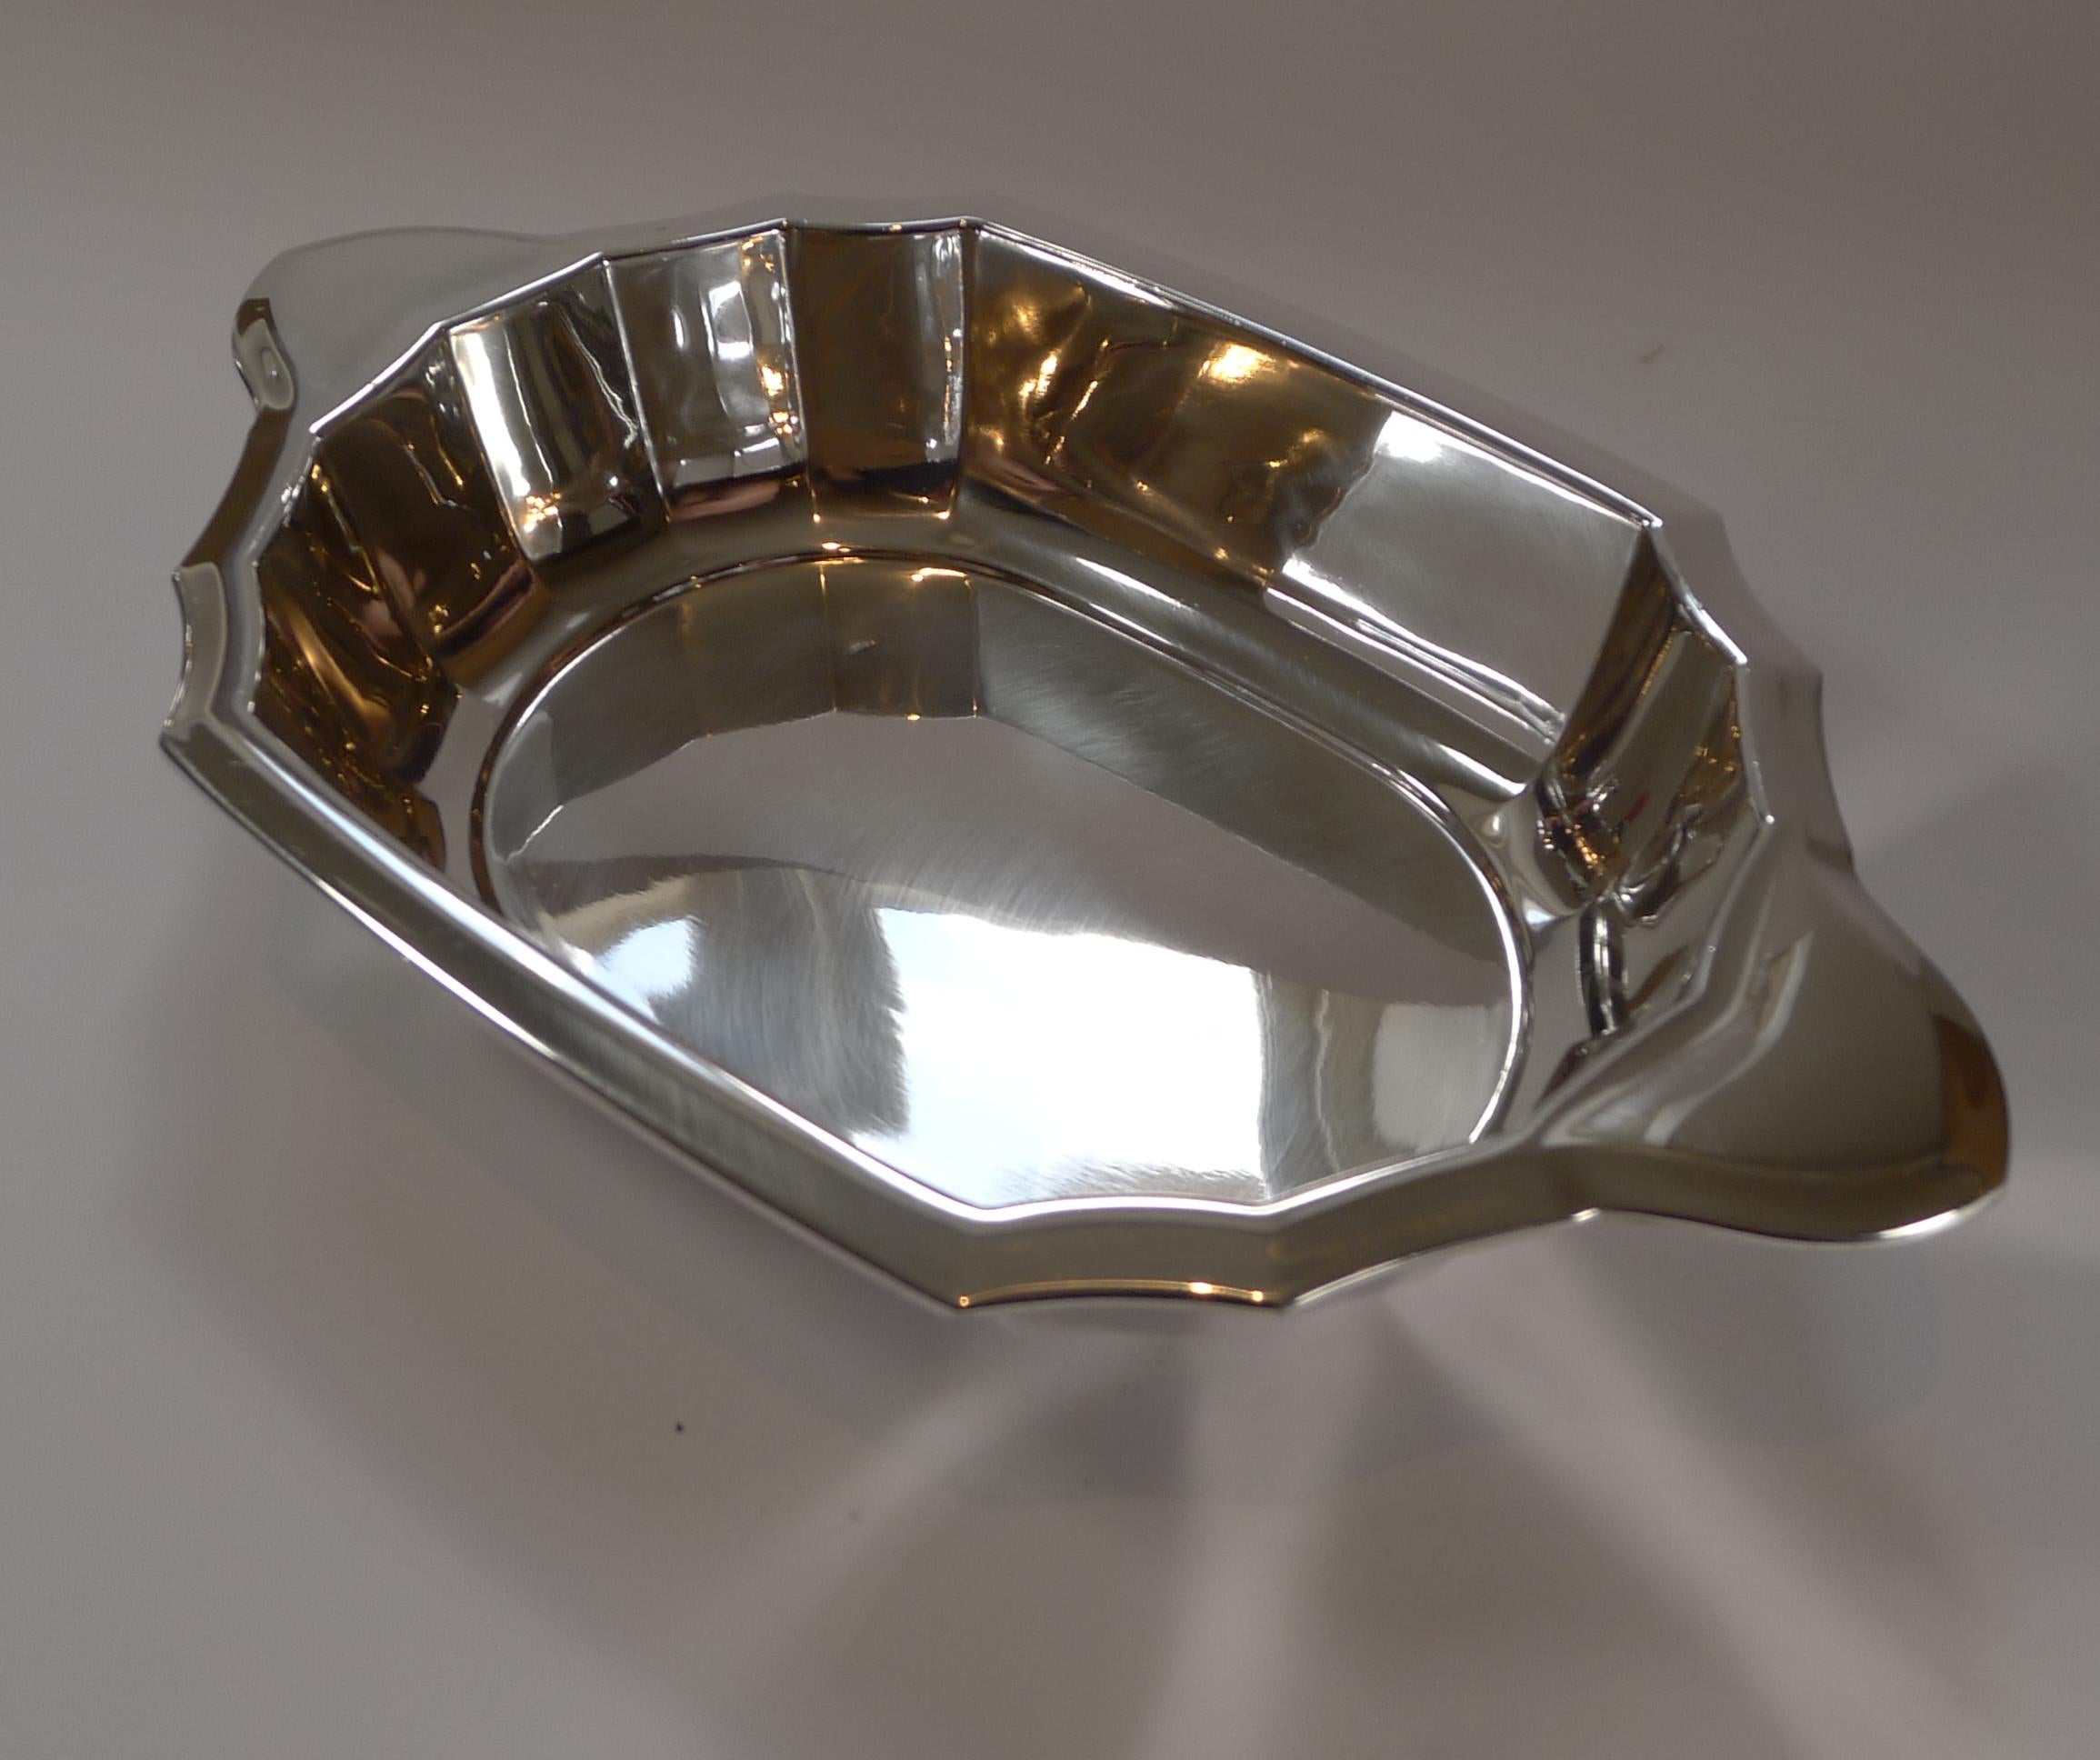 French Art Deco Christofle / Gallia Covered Serving Dish, c. 1930 In Good Condition For Sale In Bath, GB